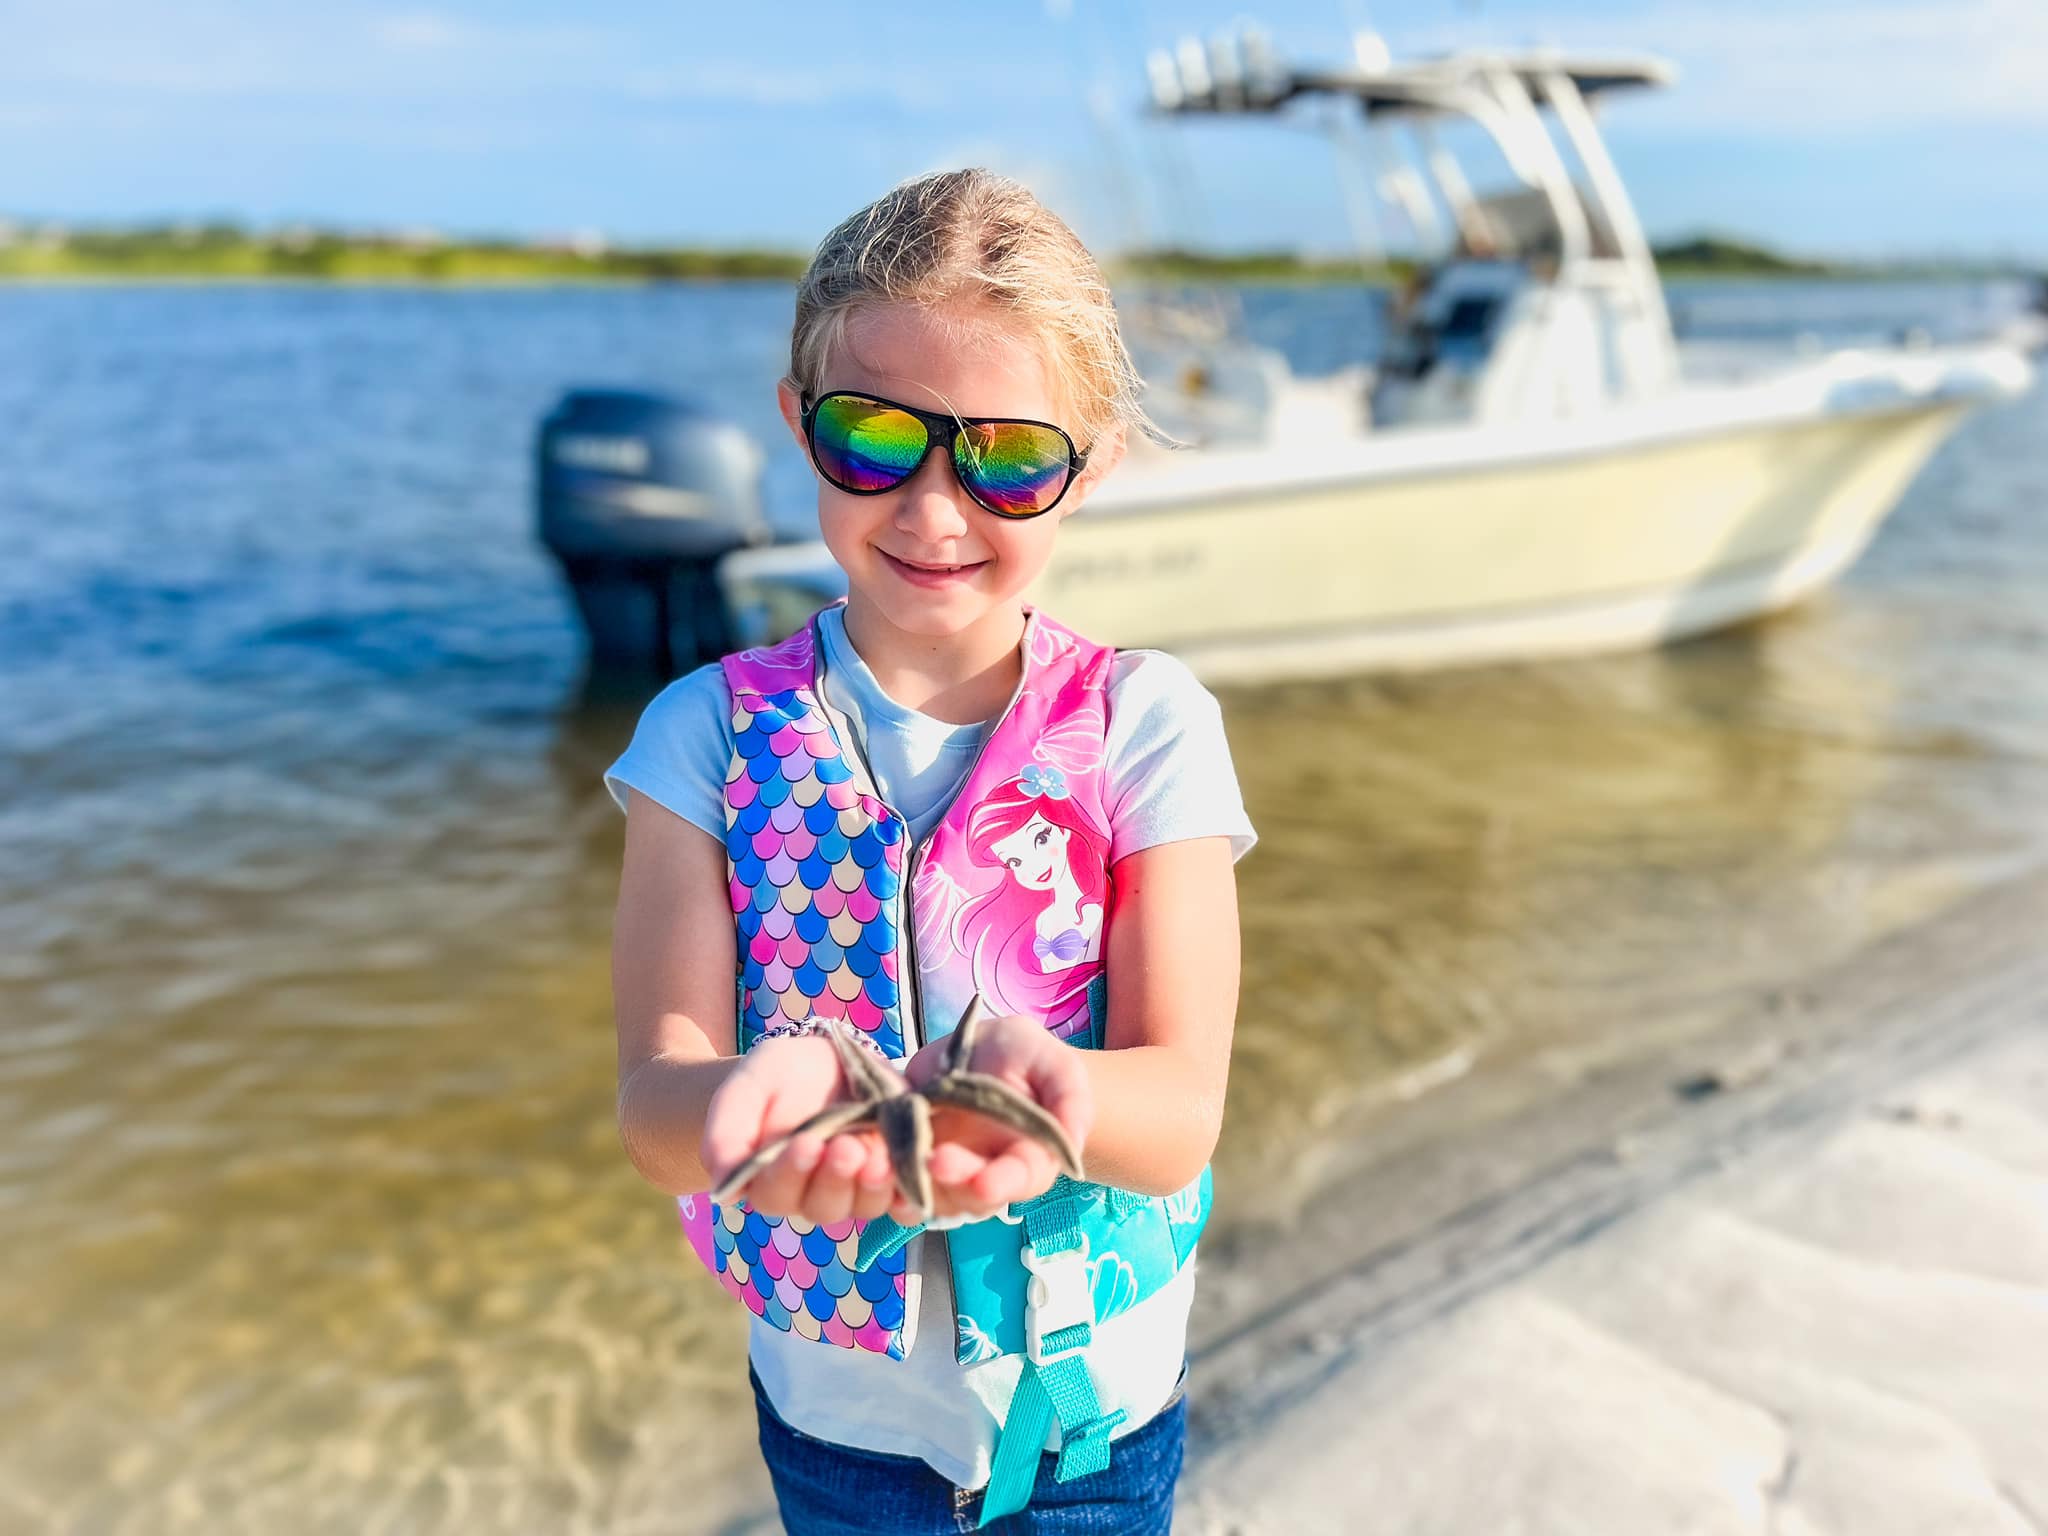 One of the most captivating aspects of our St Augustine boat tours with Todd's Rods Fishing Charters is the opportunity for enchanting wildlife encounters.